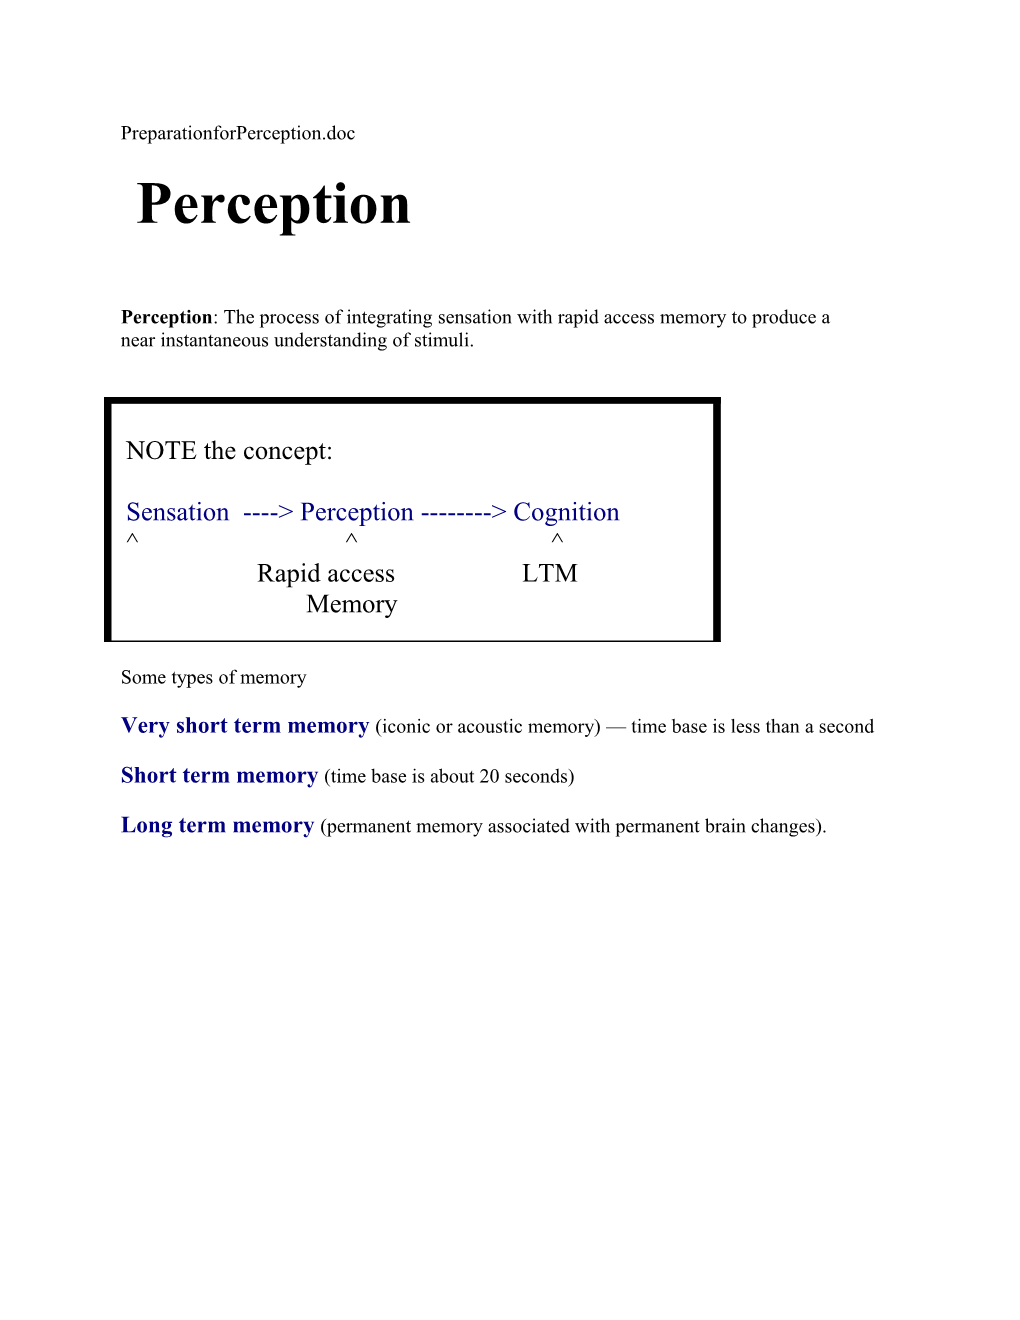 Perception: the Process of Integrating Sensation with Rapid Access Memory to Produce A